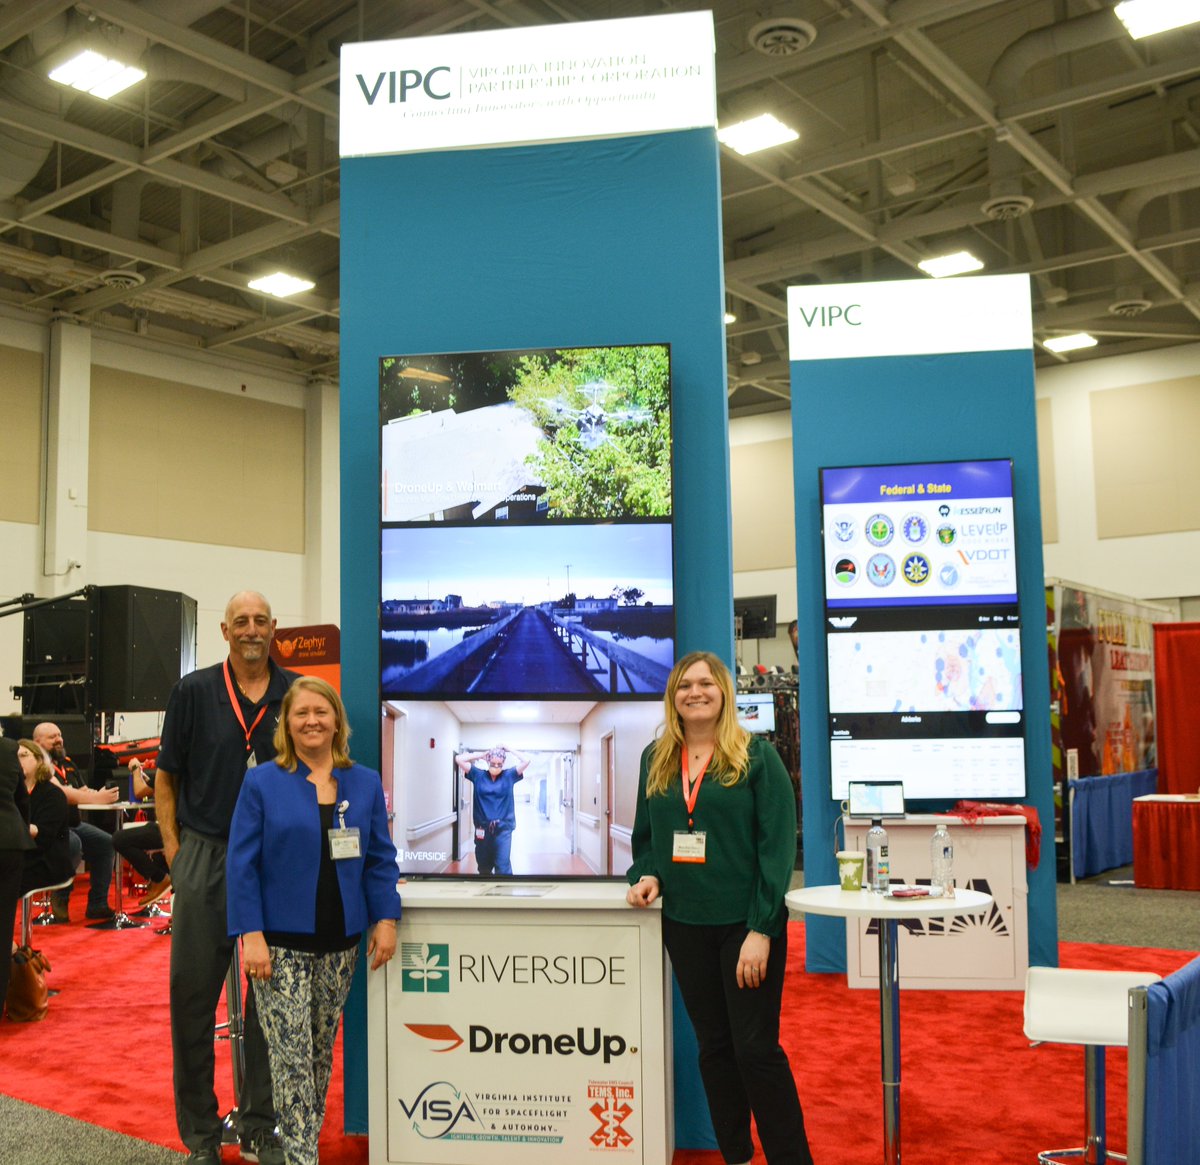 We attended the 2023 Virginia Fire & Rescue Conference at the @VABeachCC this week. We enjoyed speaking to exhibit attendees about an exciting project coming up that involves Riverside Health, DroneUp, VIPC & more. Stay tuned for more on this project.